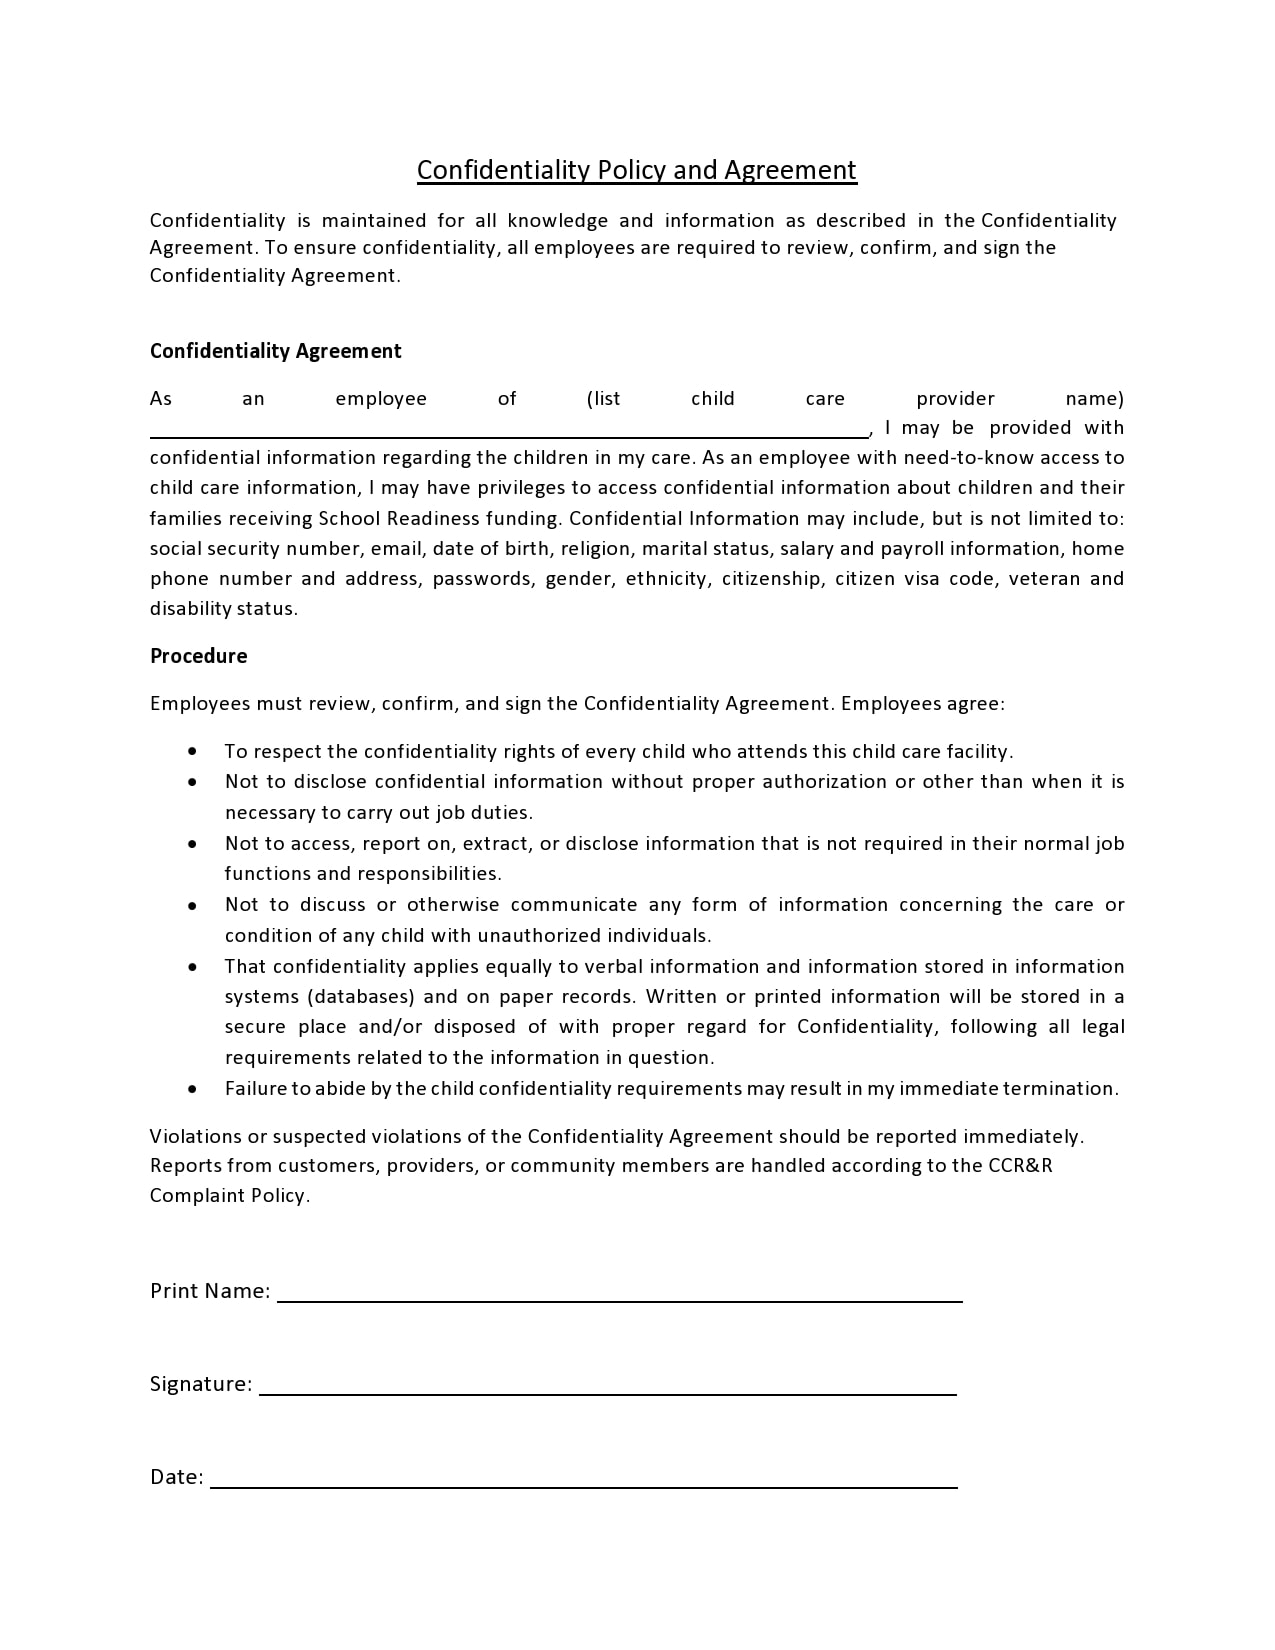 45 Free Confidentiality Agreement Templates (NDA) TemplateArchive